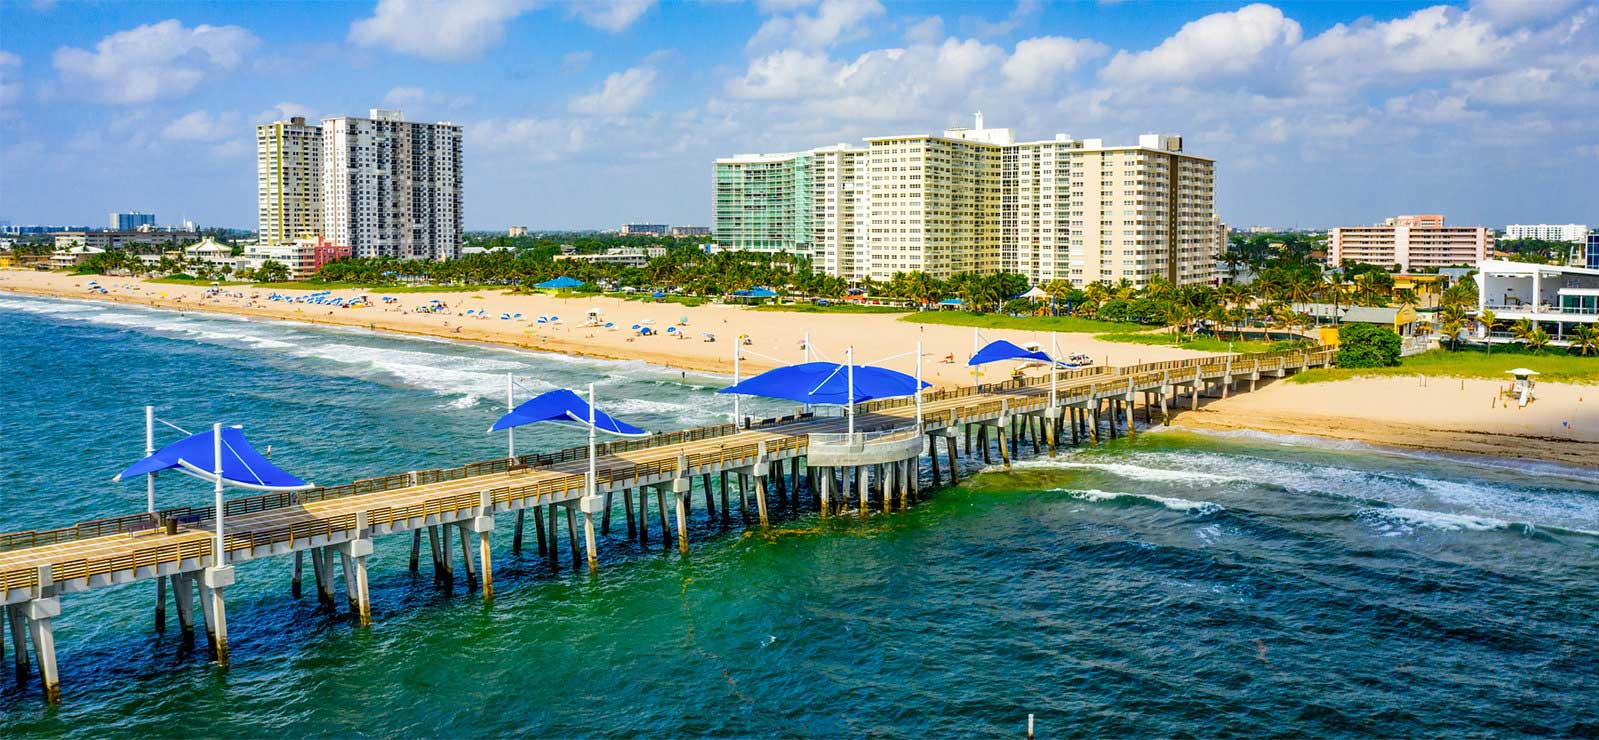 Pompano Beach, the heart of the gold coast in Ft Lauderdale